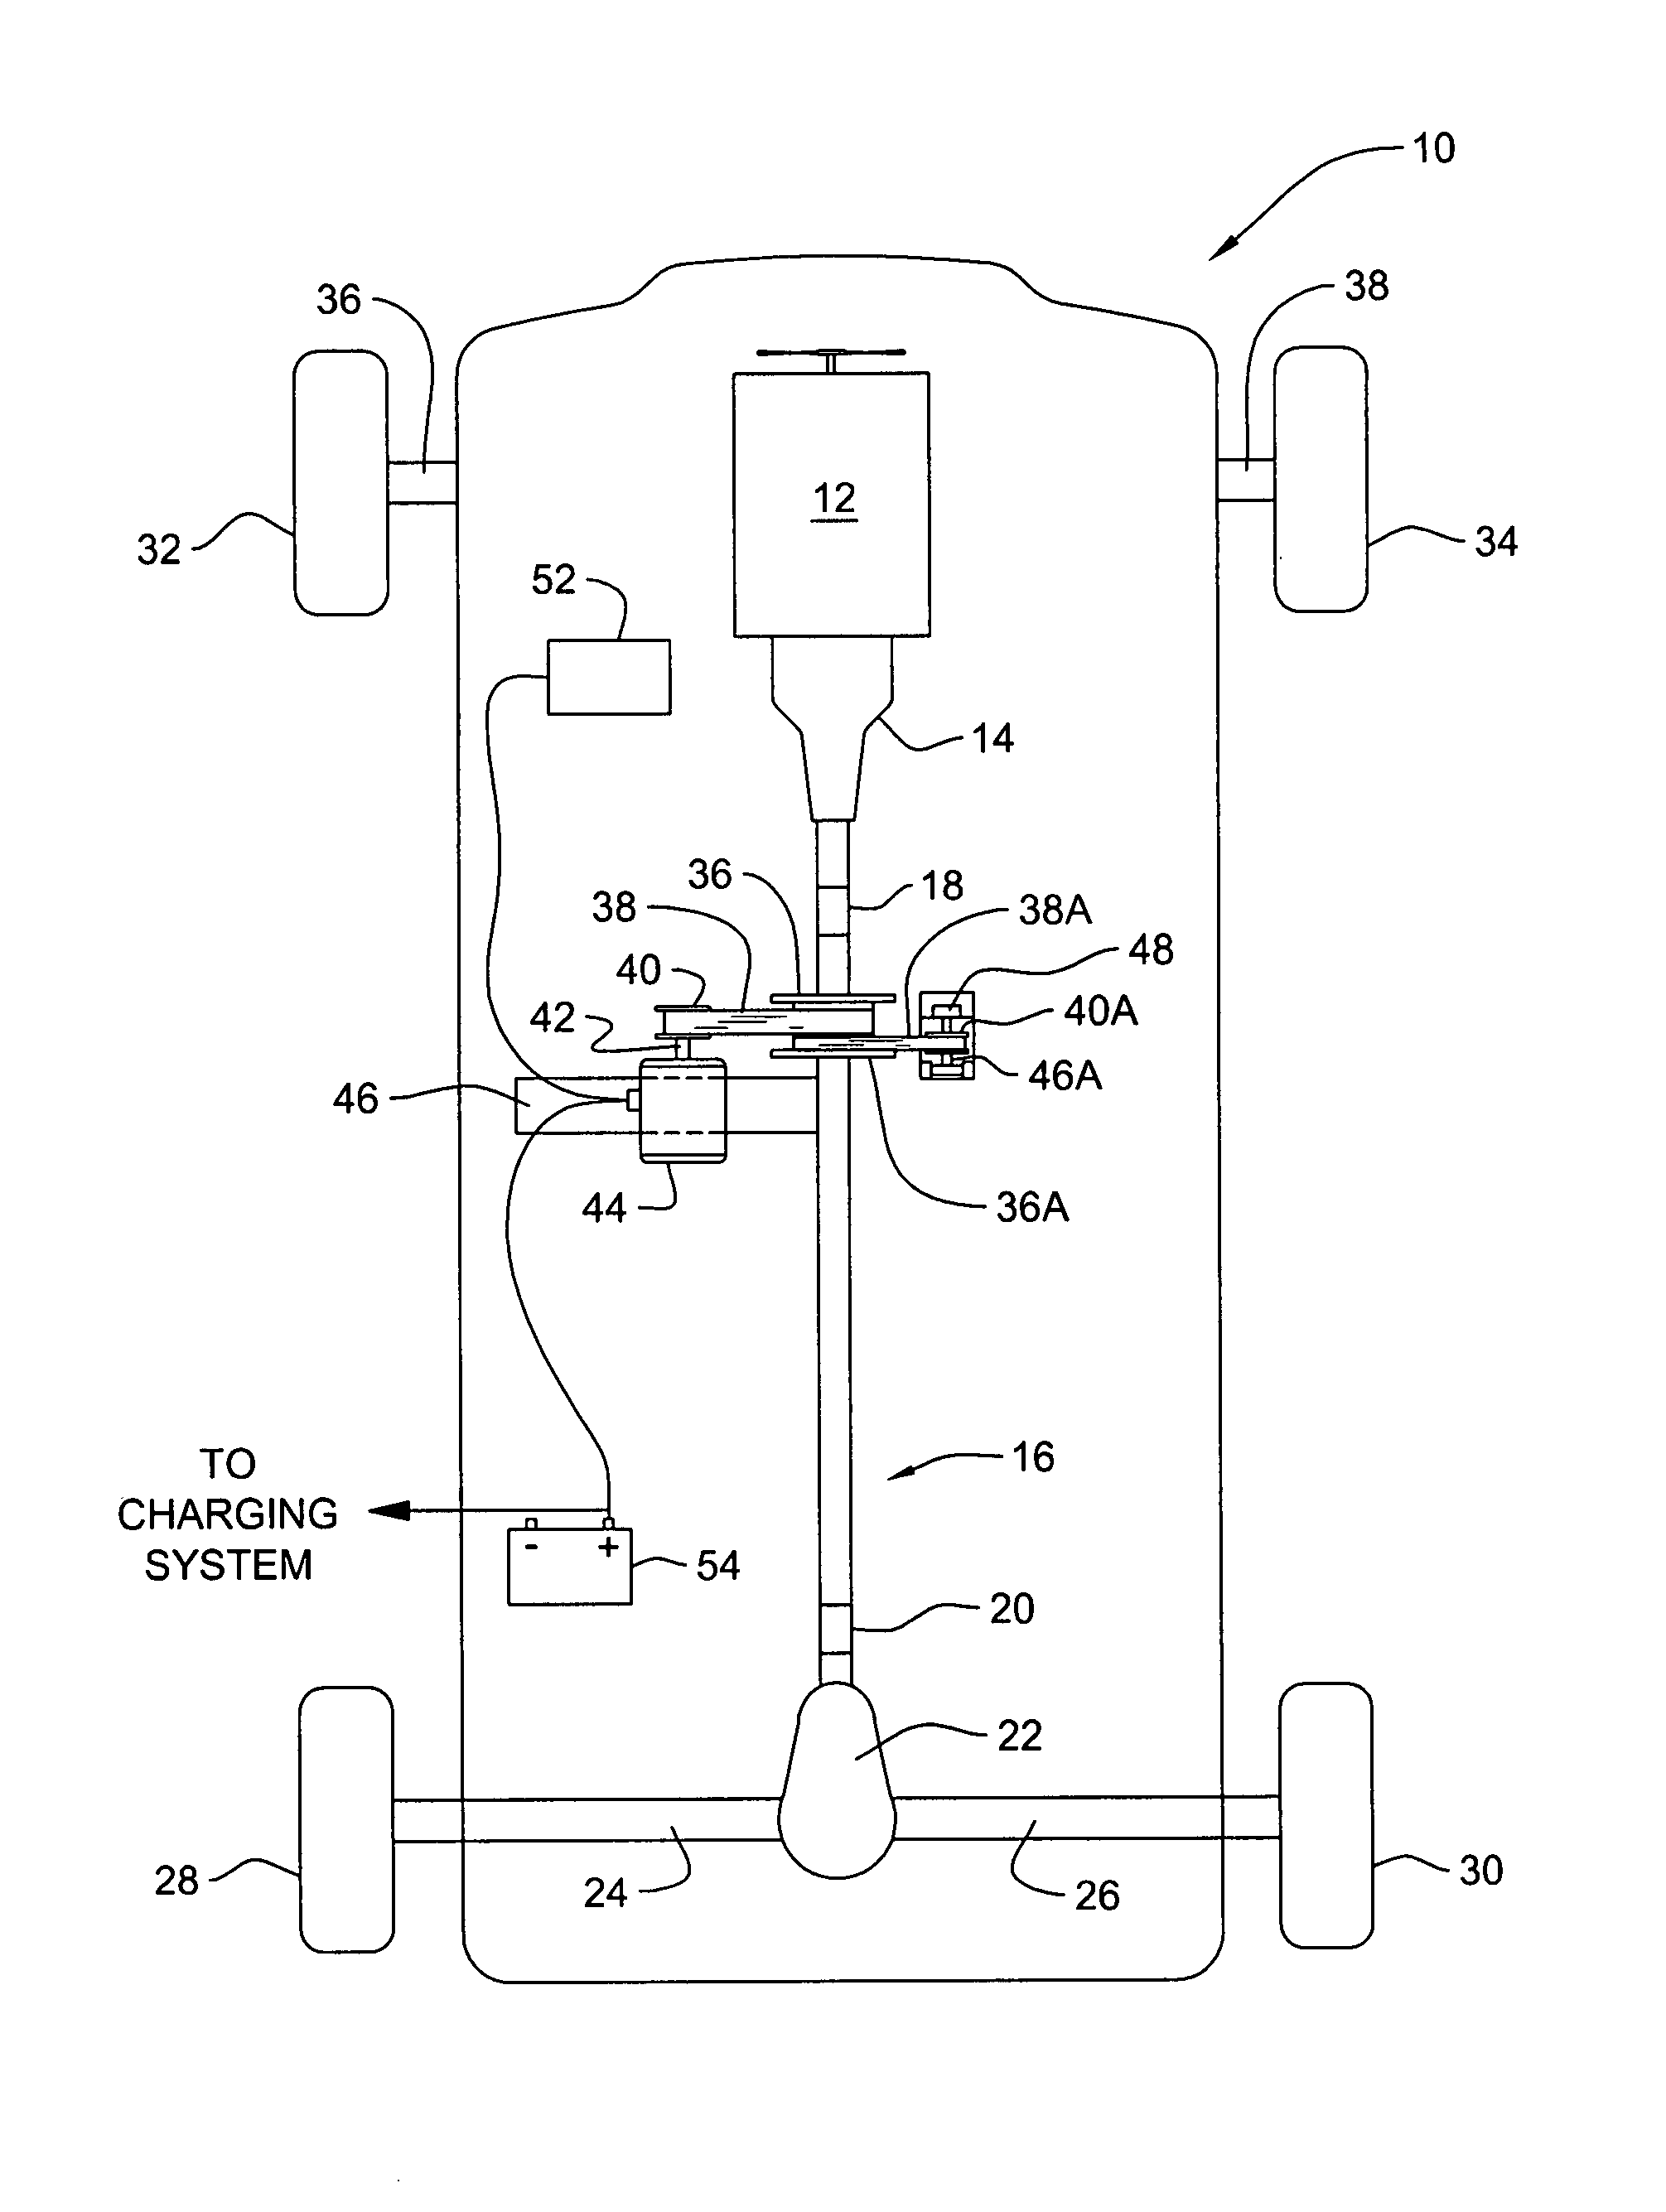 Vehicle electrical assist apparatus and kit for same